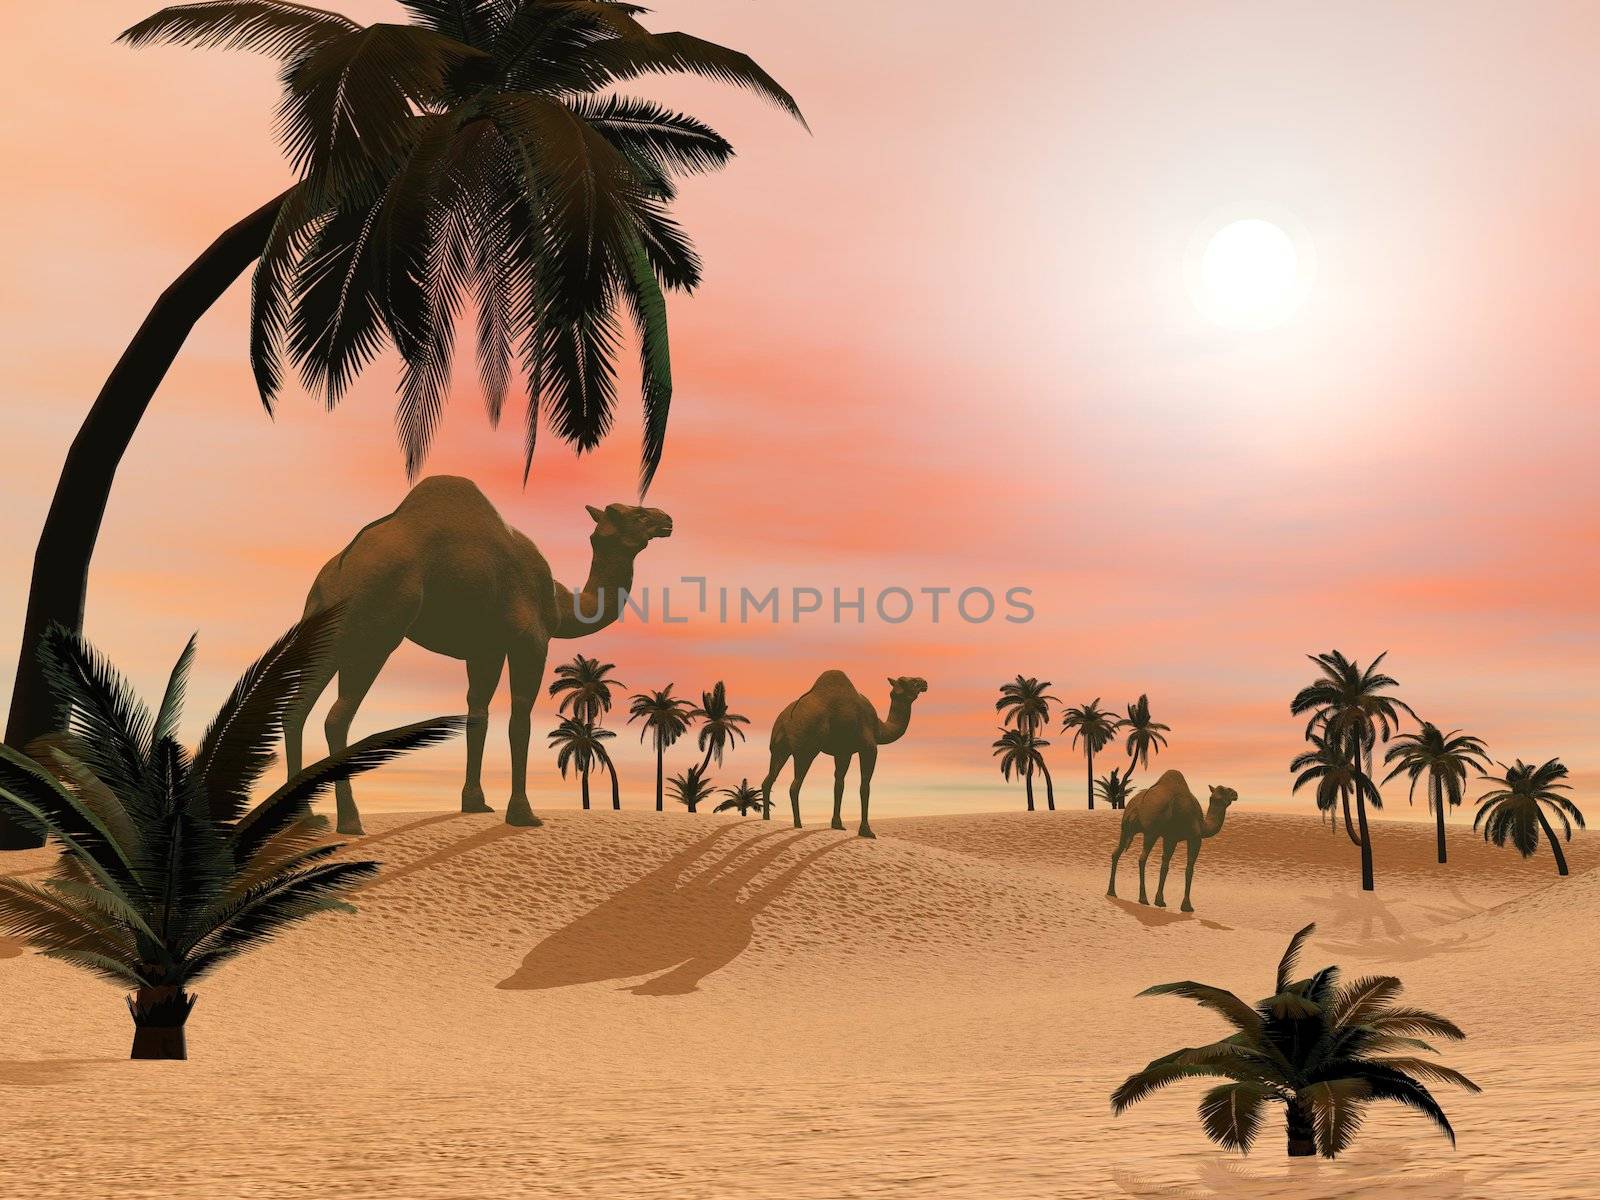 Camels in the desert - 3D render by Elenaphotos21